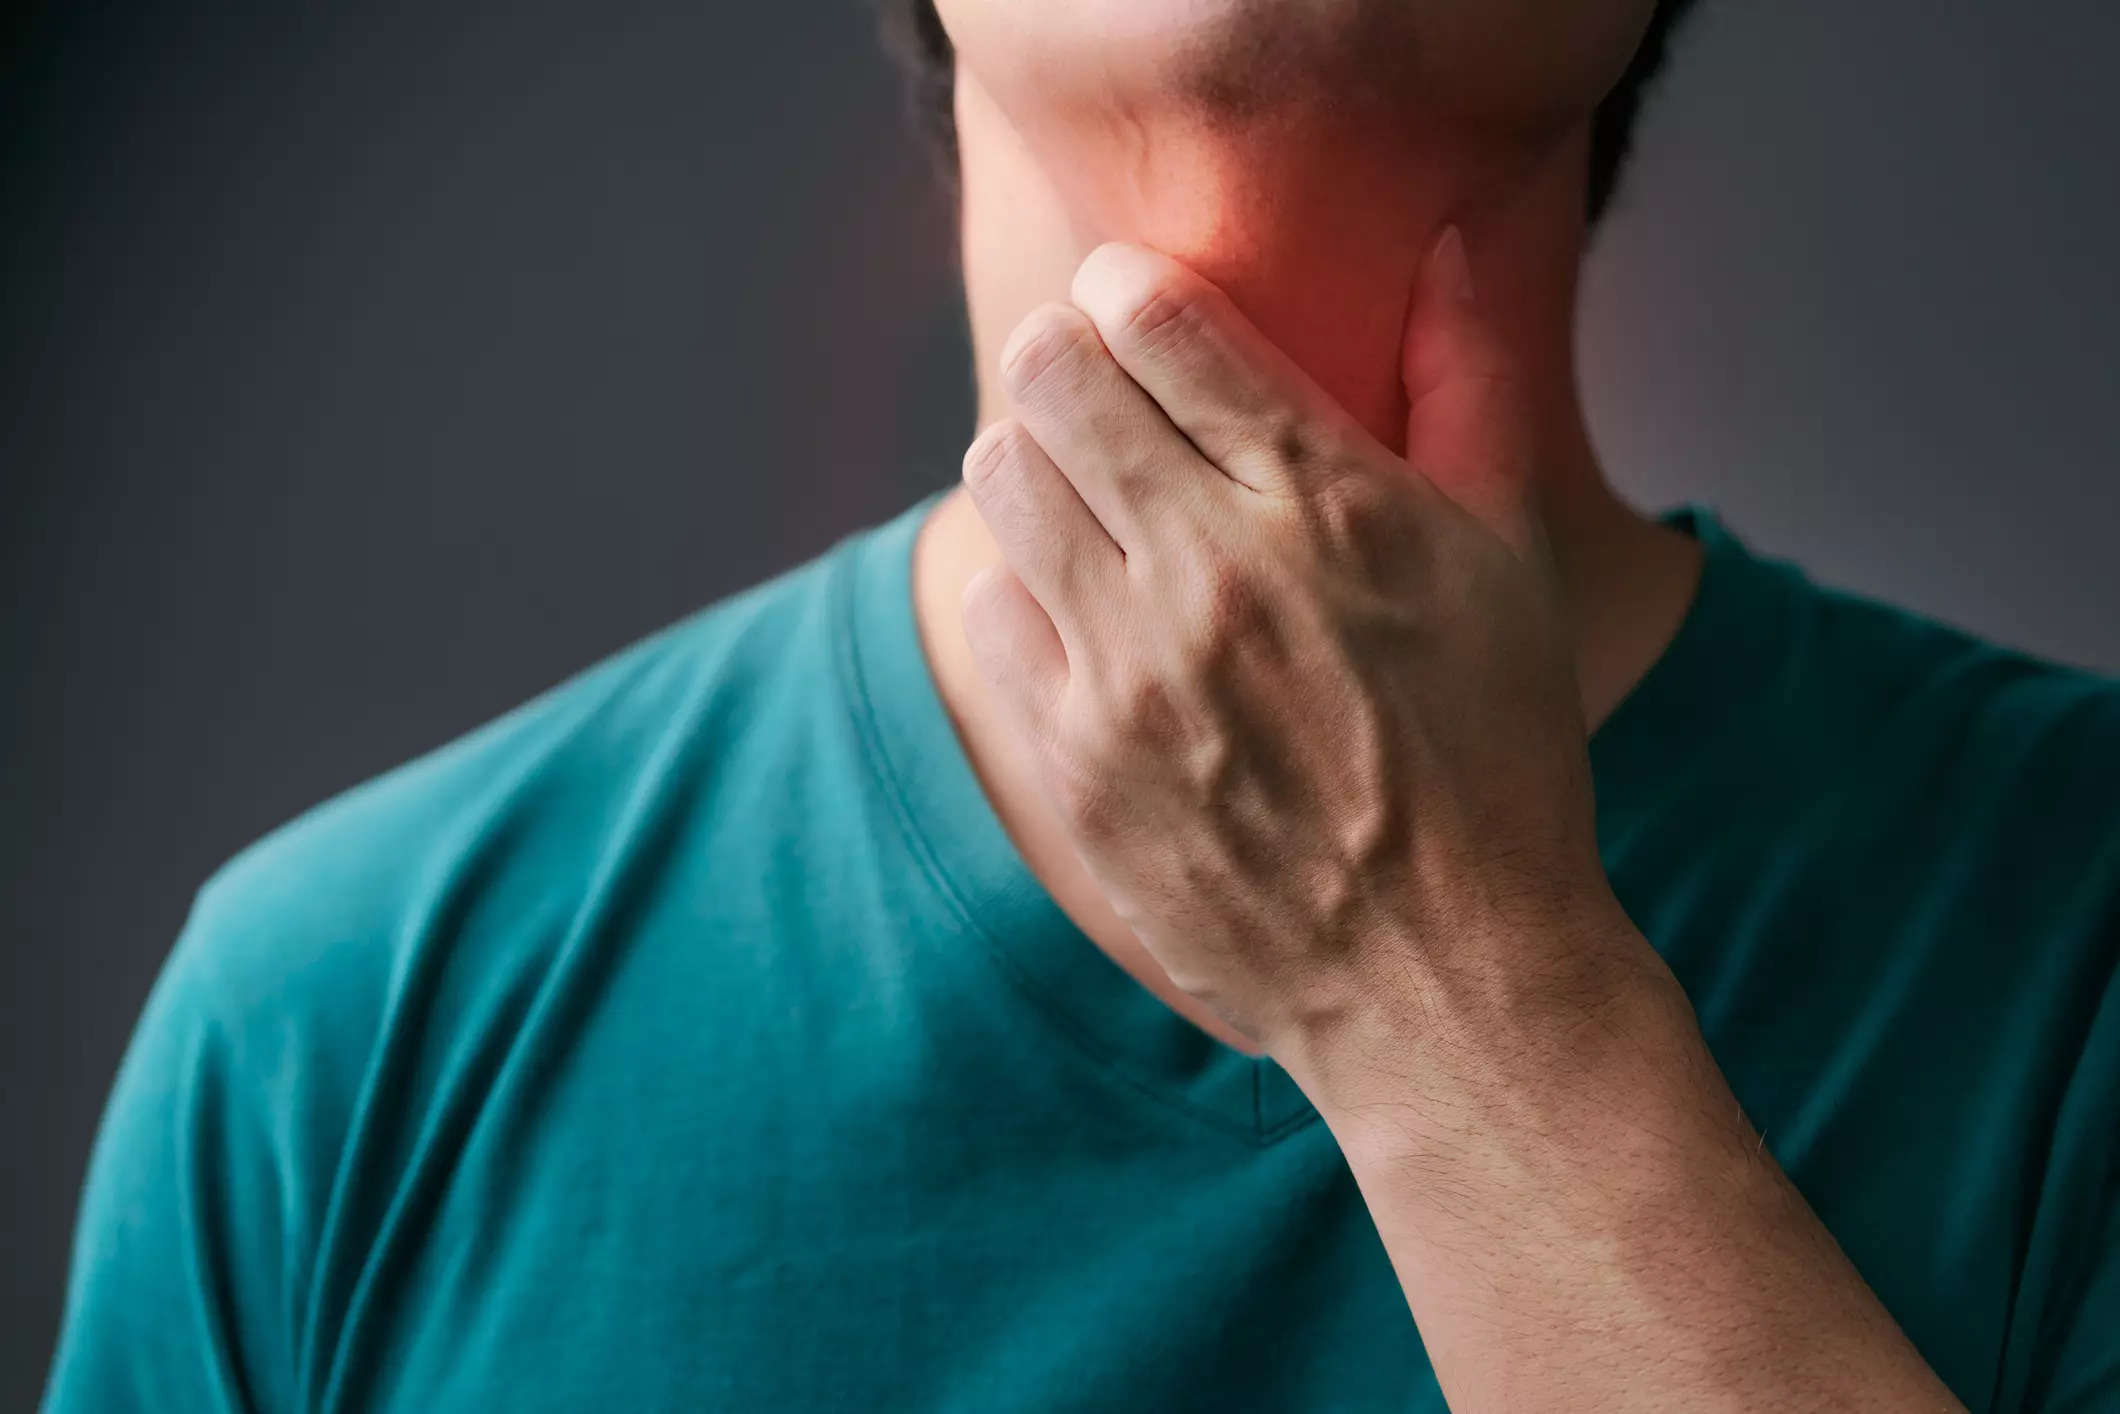 In the early stages, voice changes could occur due to a sore throat – only when the condition prevails over a period of time does it require medical attention.